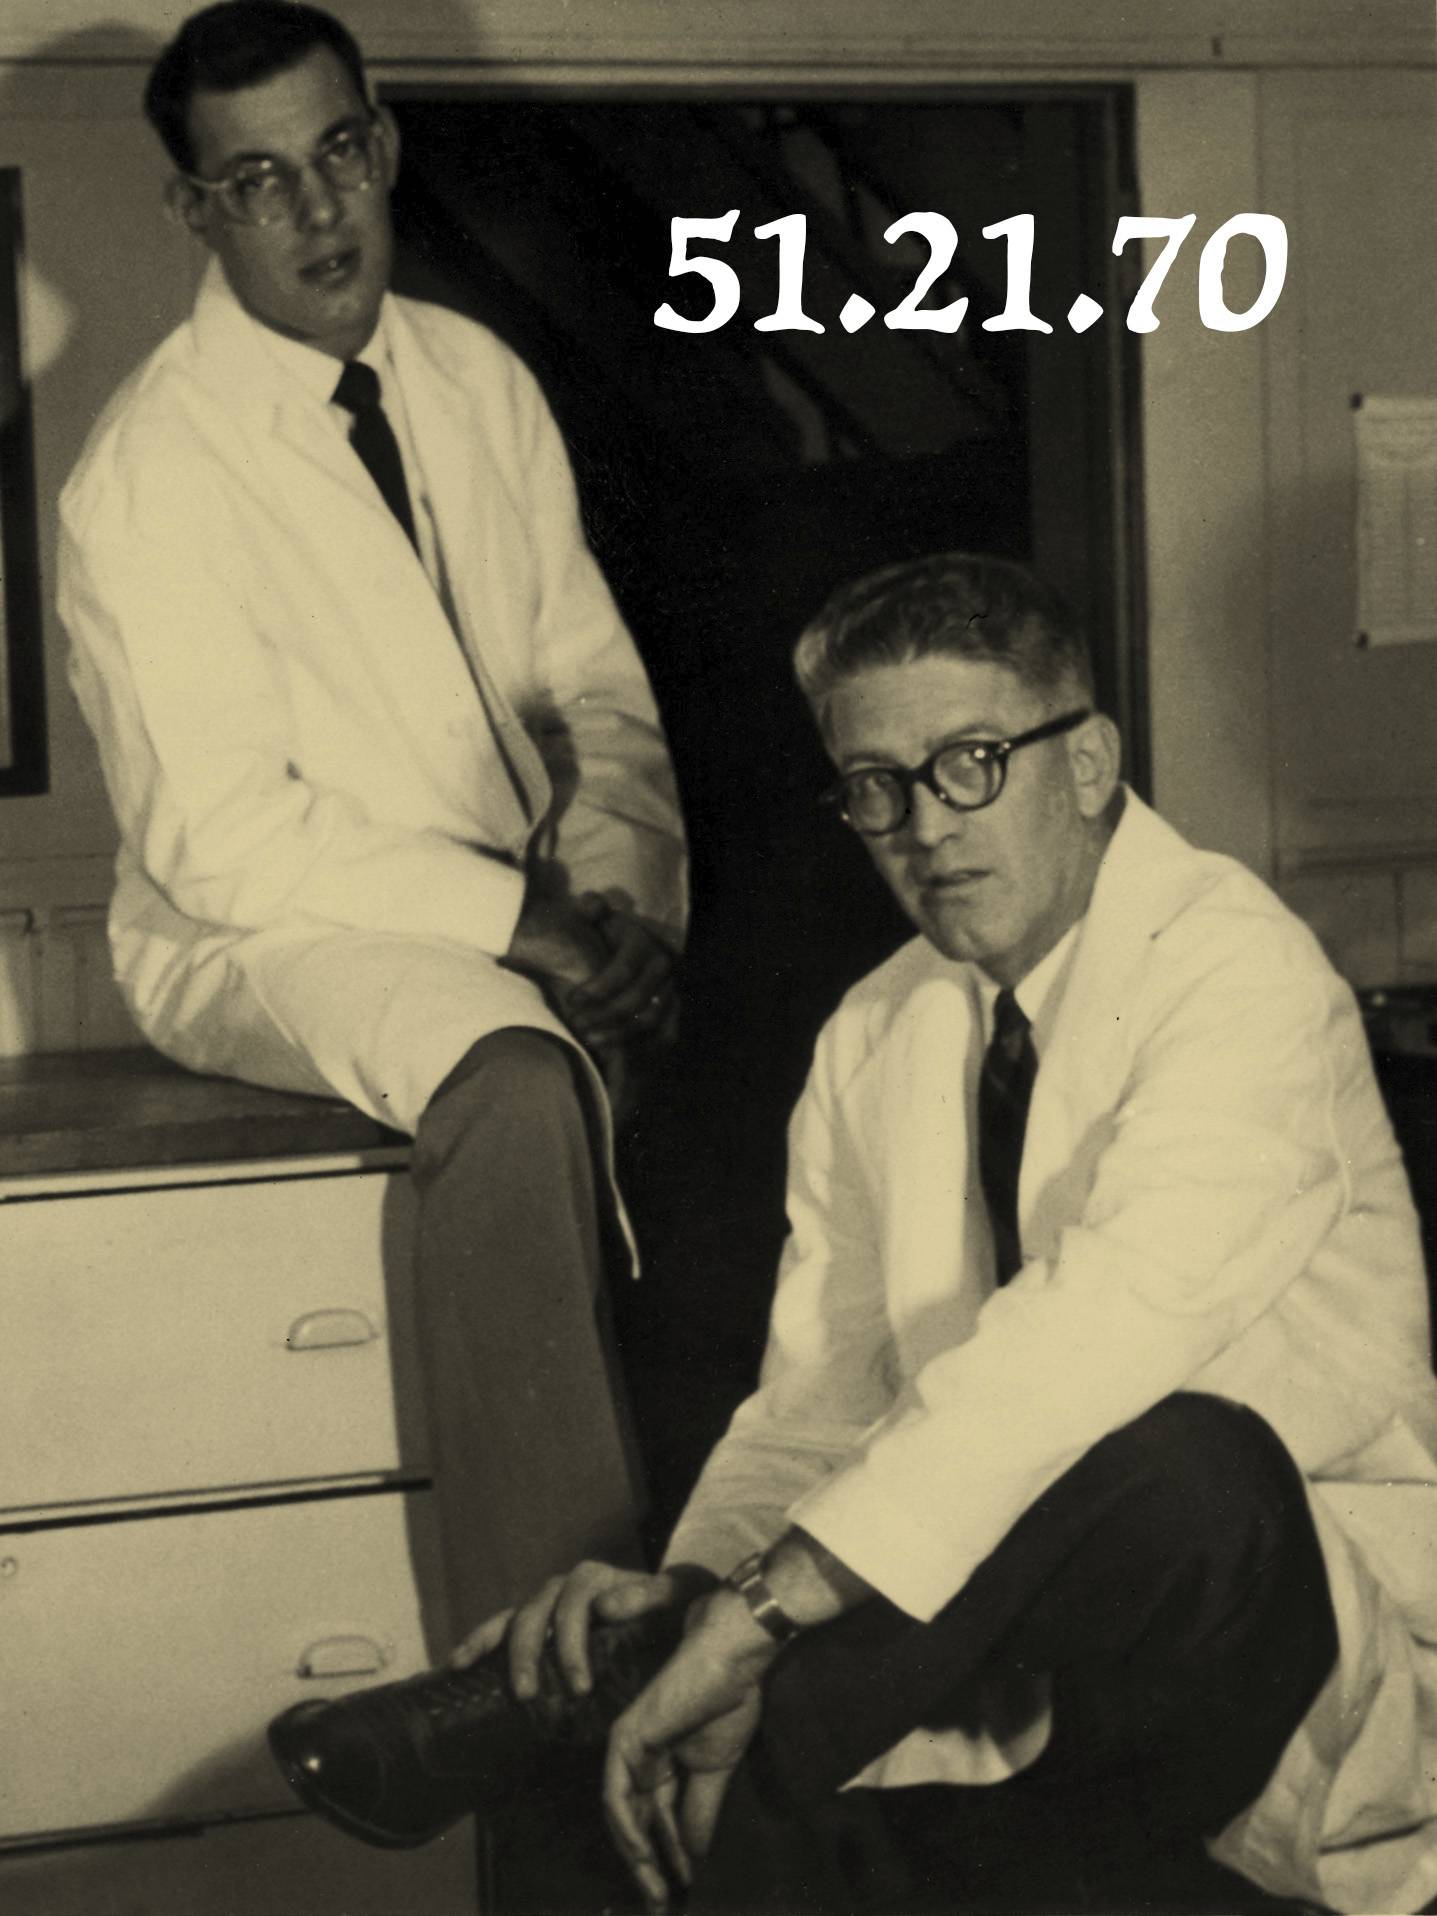 Photo: Our first graduate, Robert C. Benassi, with Professor O.A. Parkes. The year is 1950.